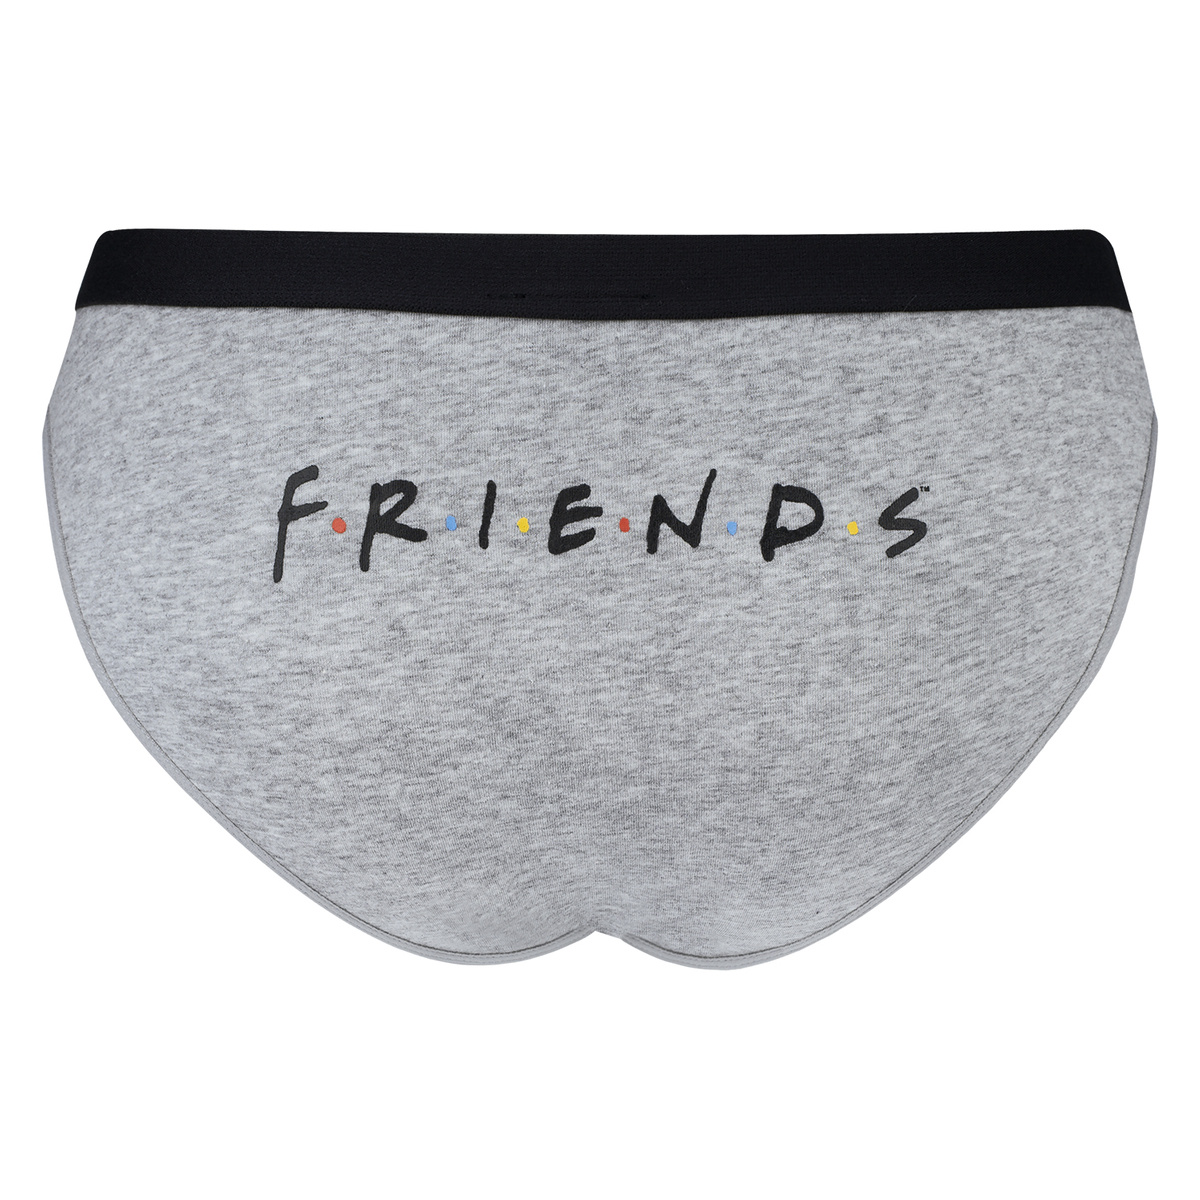 2x Women's colored Panties SOXO | Friends | perfect for a gift for her